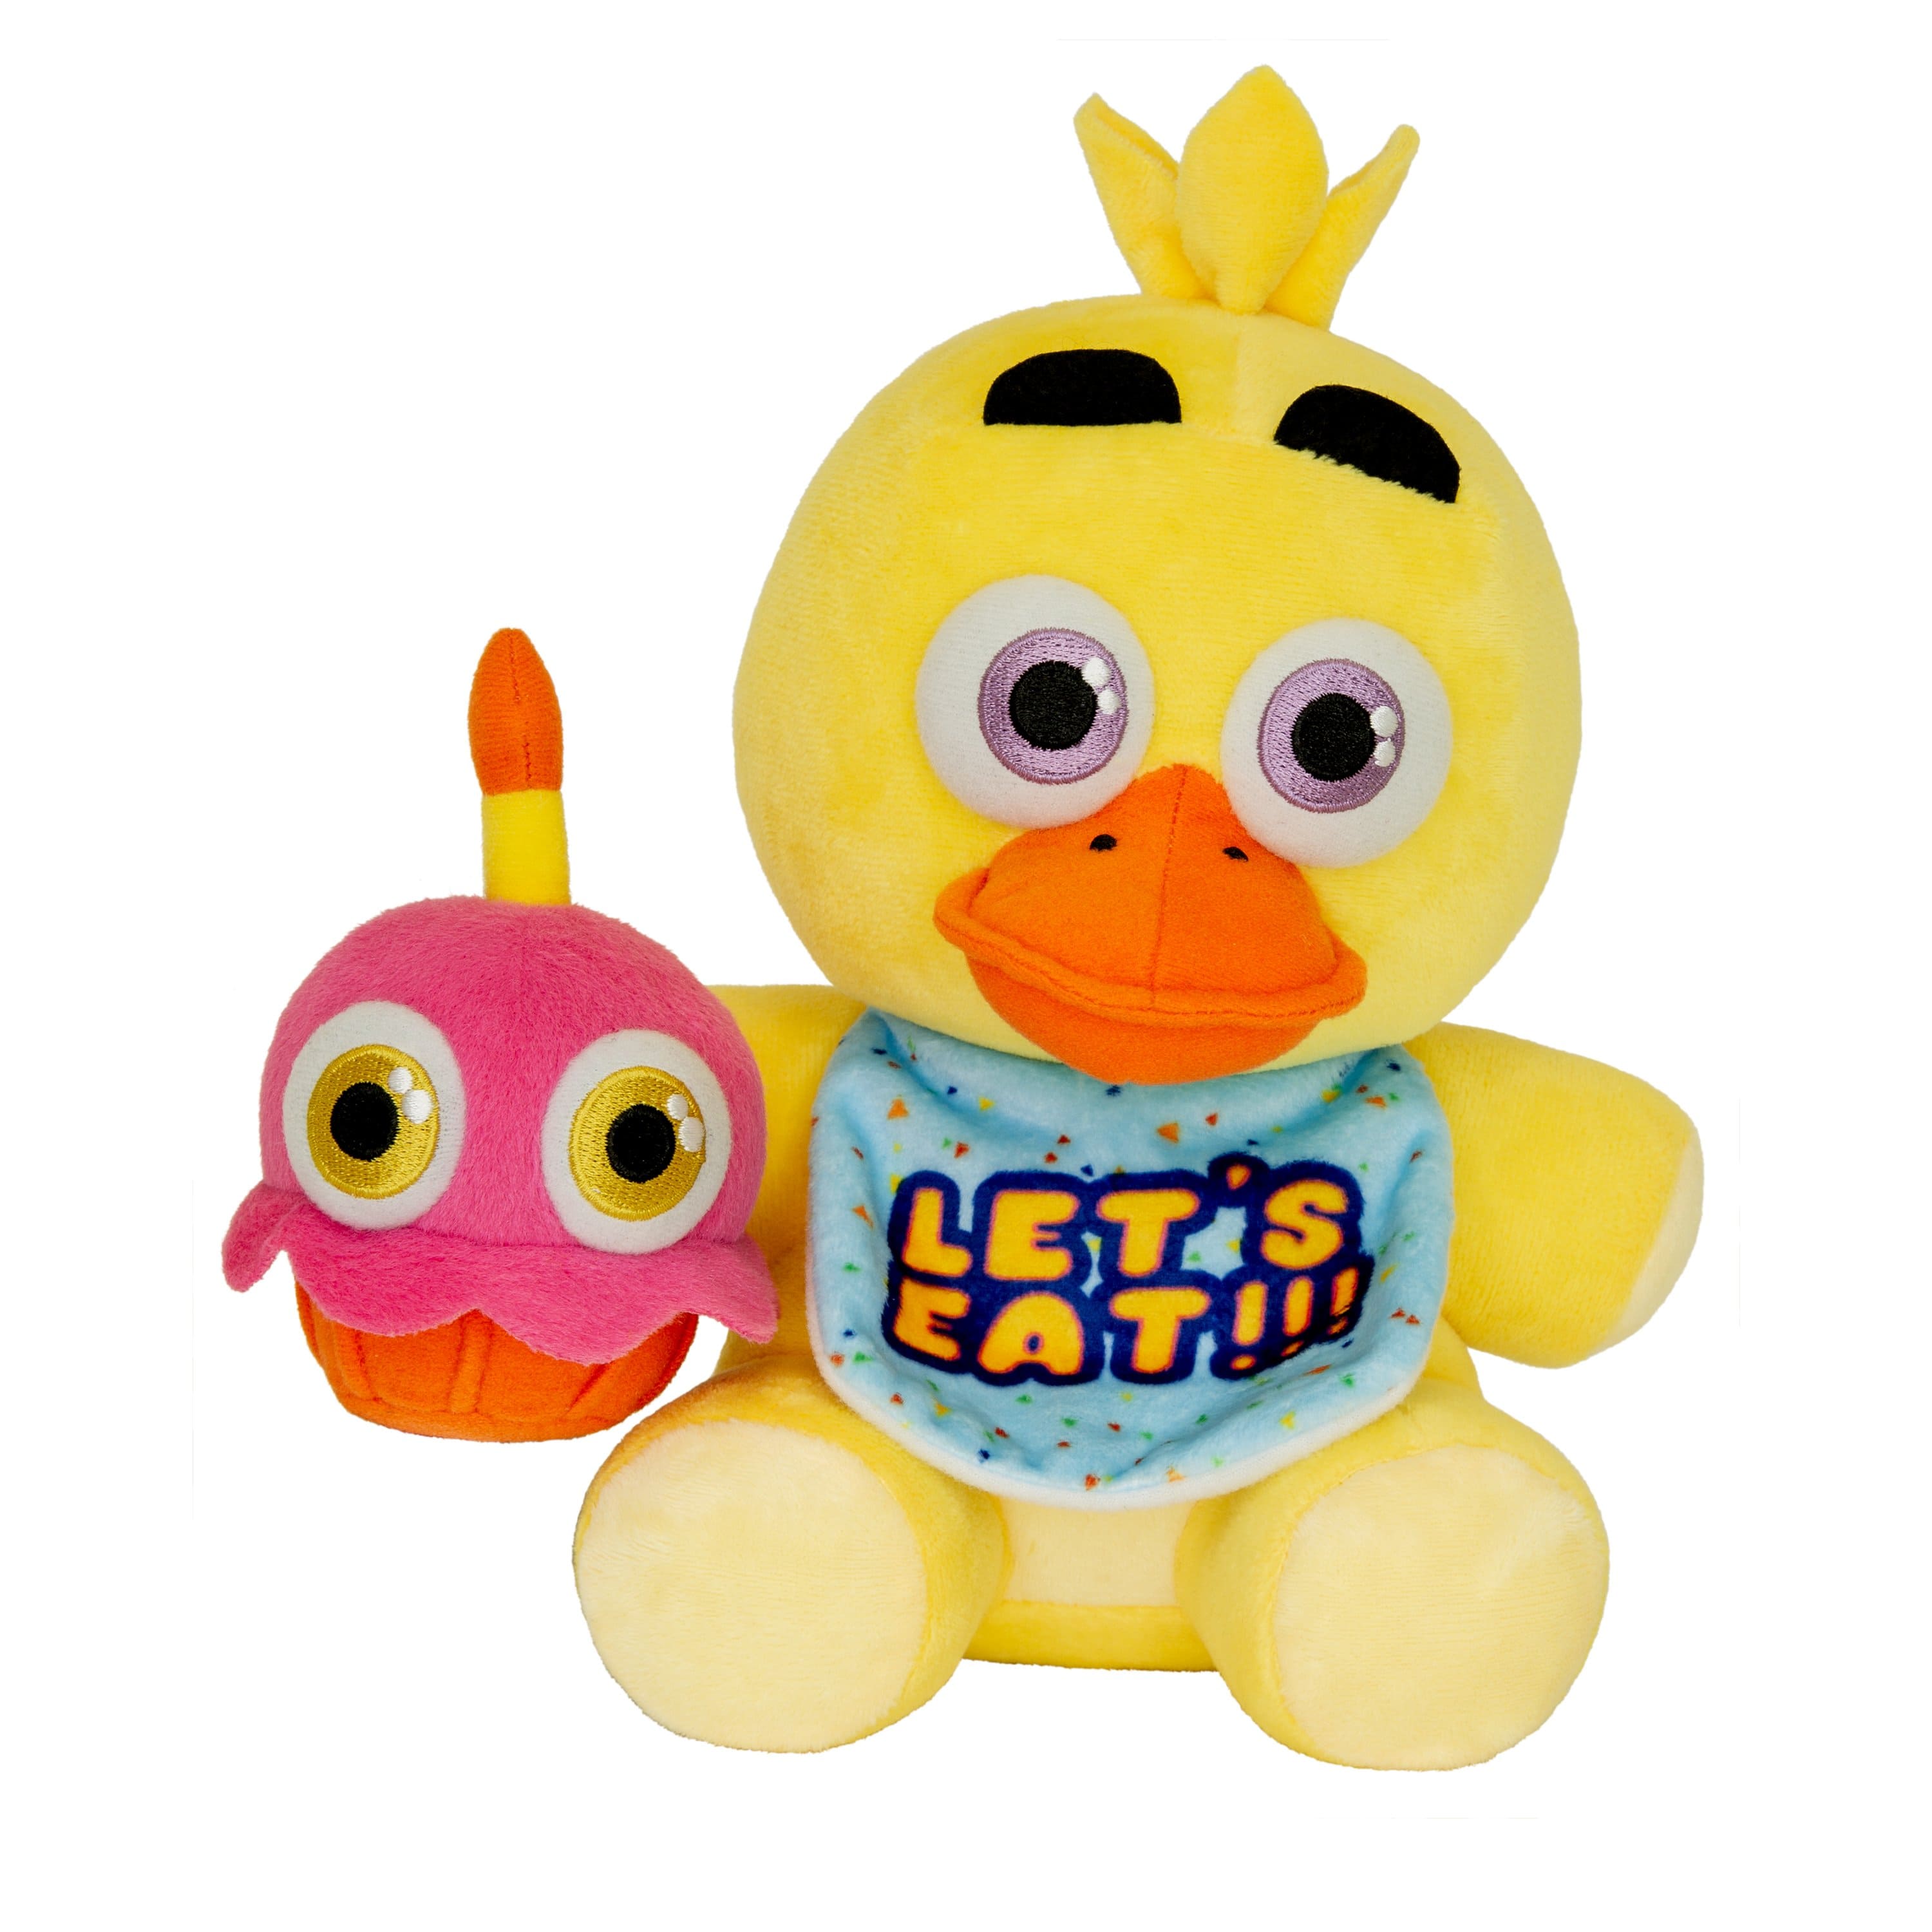 Five Nights at Freddy's - Chica and Cupcake Plush